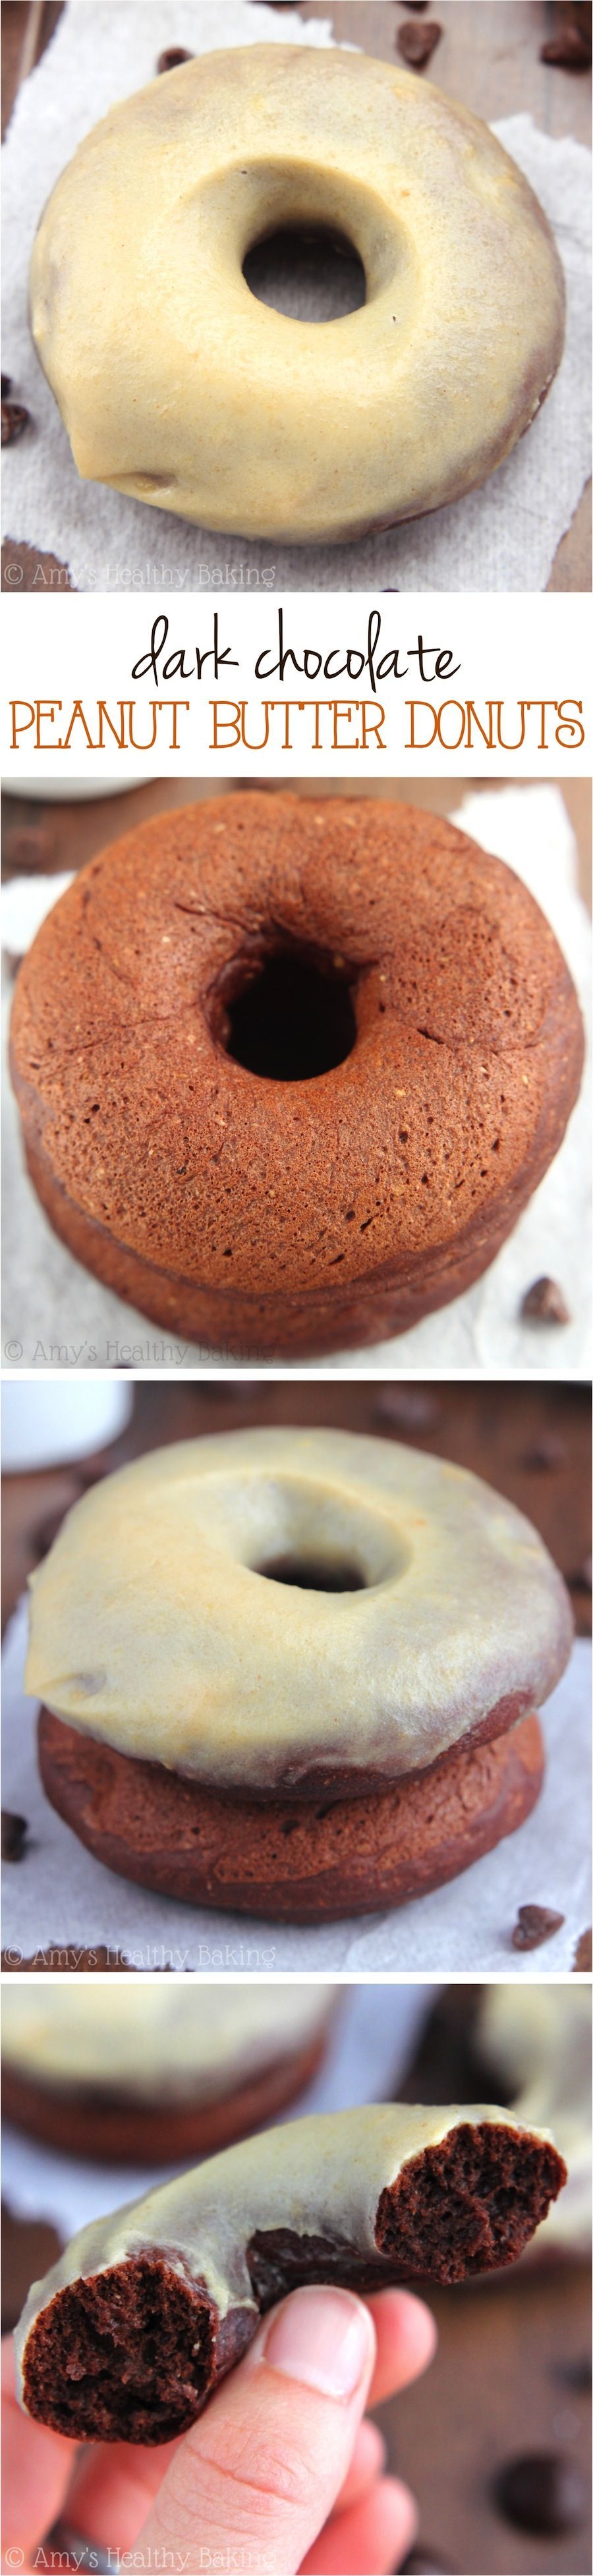 Dark Chocolate Peanut Butter Donuts — they taste like cupcakes crossed with Reese’s PB cups! Baked, not f